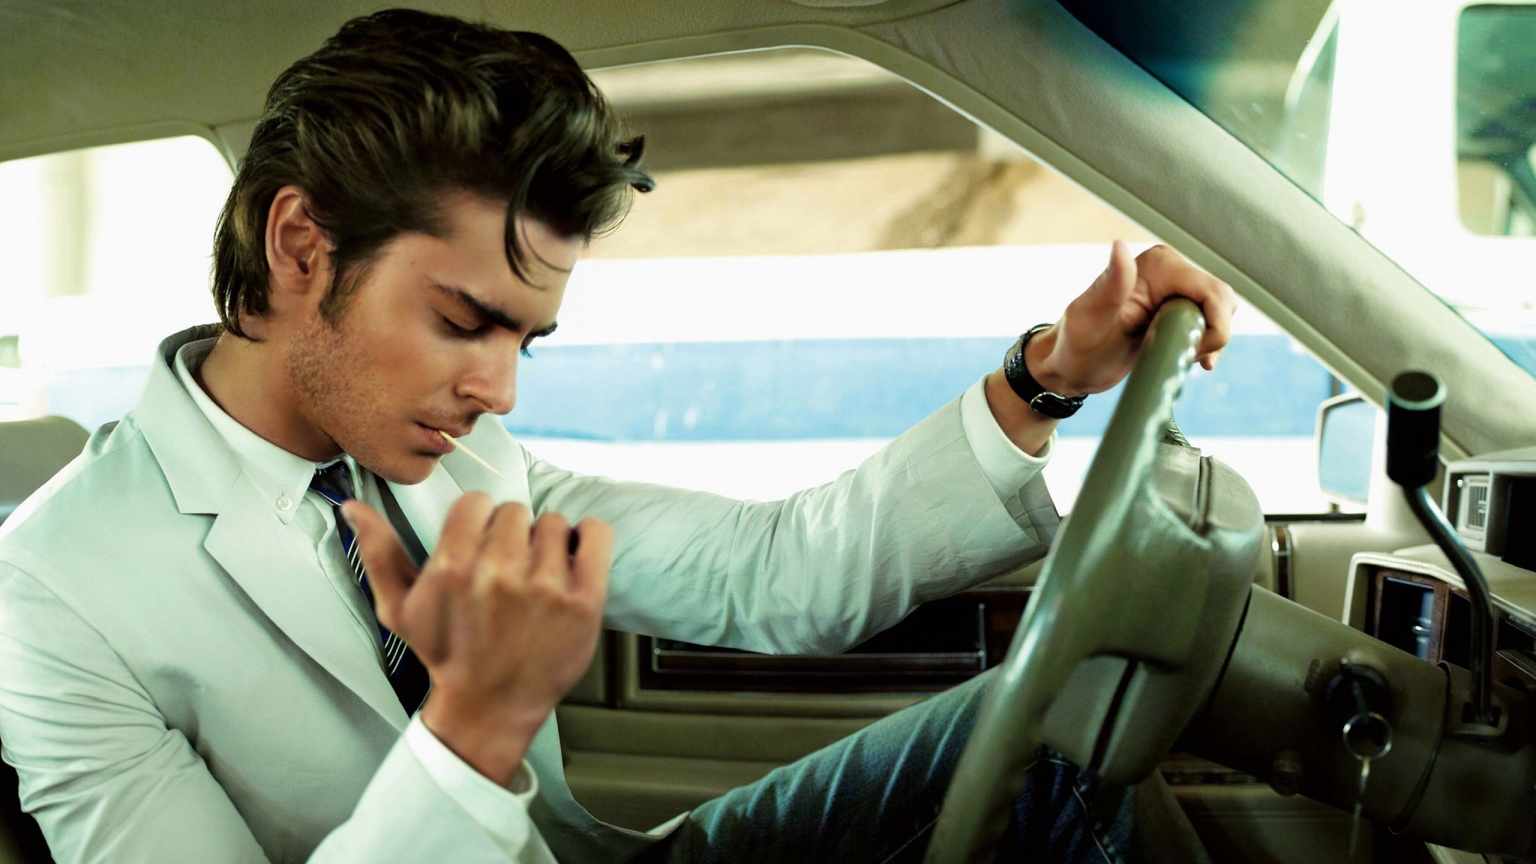 Zac Efron Rock and Roll Style for 1536 x 864 HDTV resolution